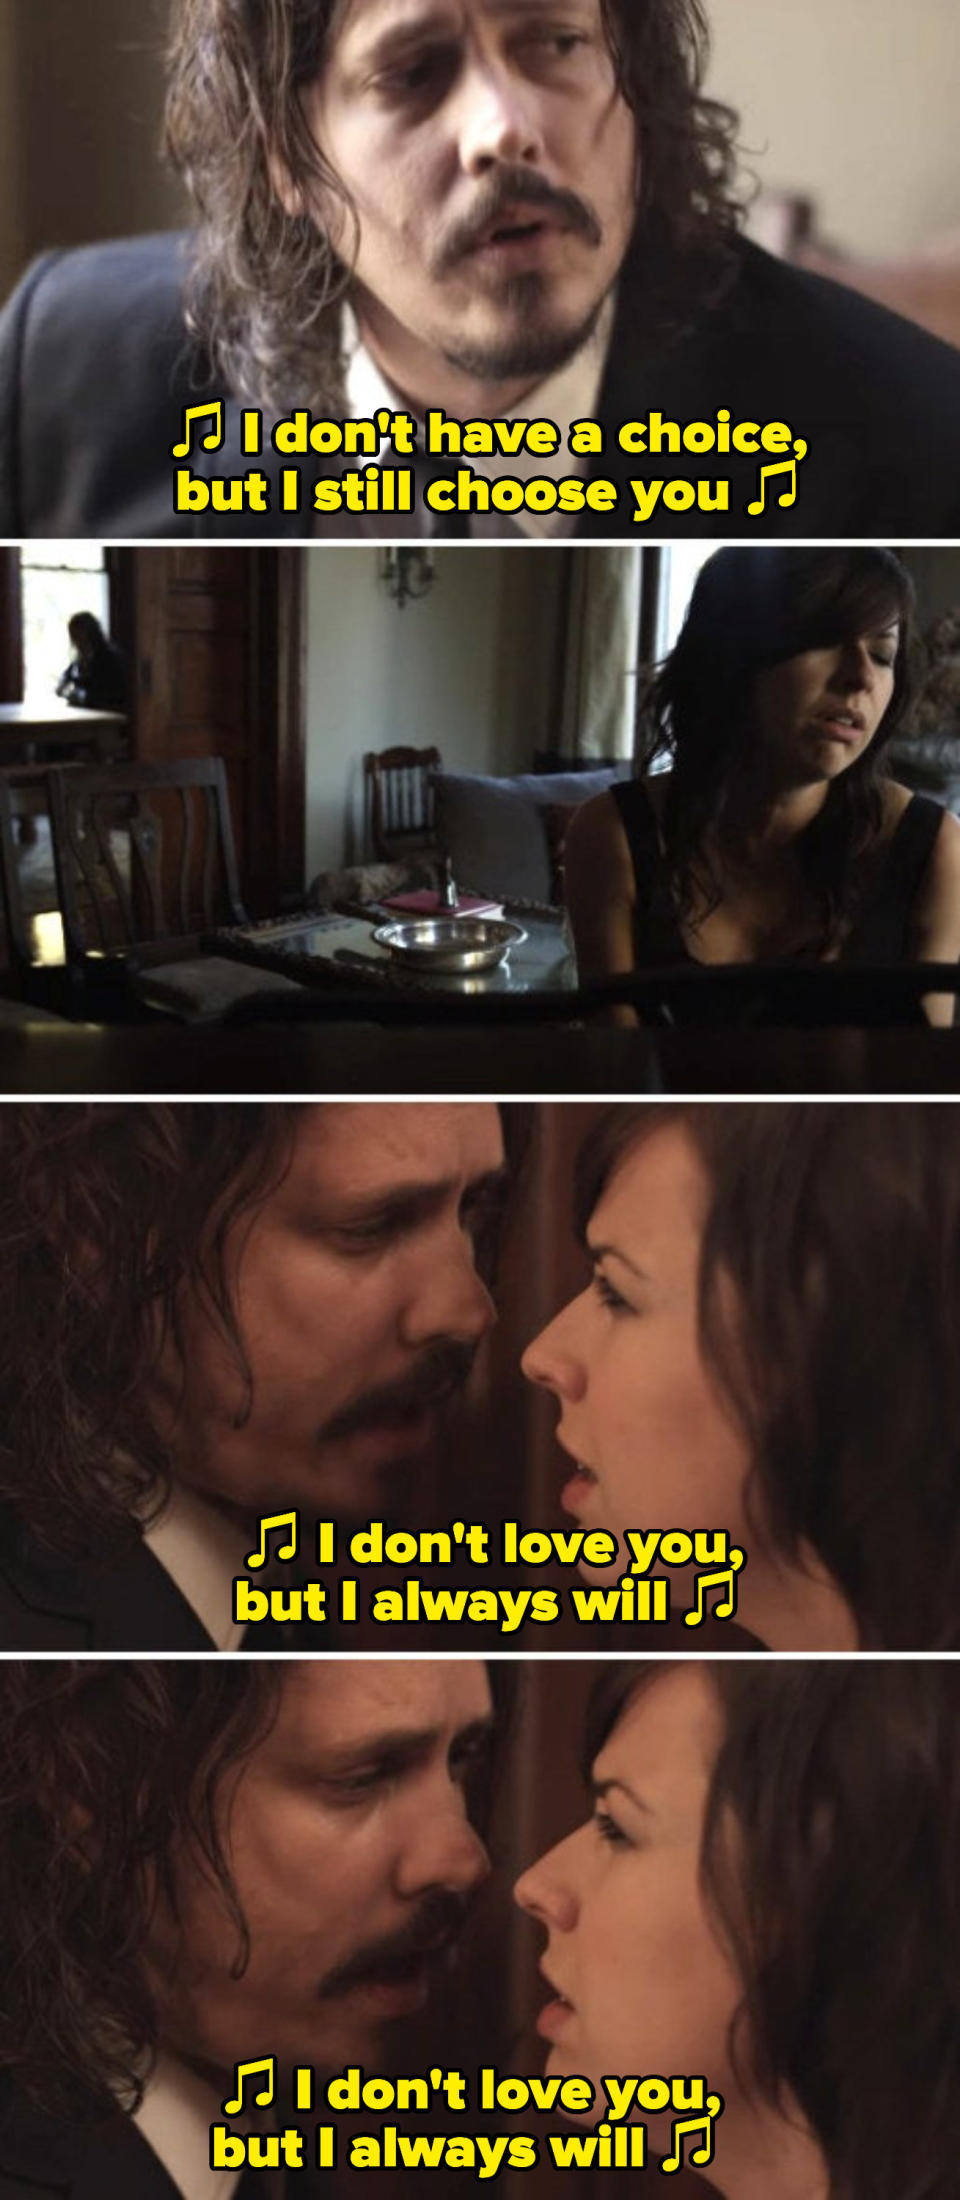 The Civil Wars in their "Poison & Wine" music video, singing: "I don't love you, but I always will"